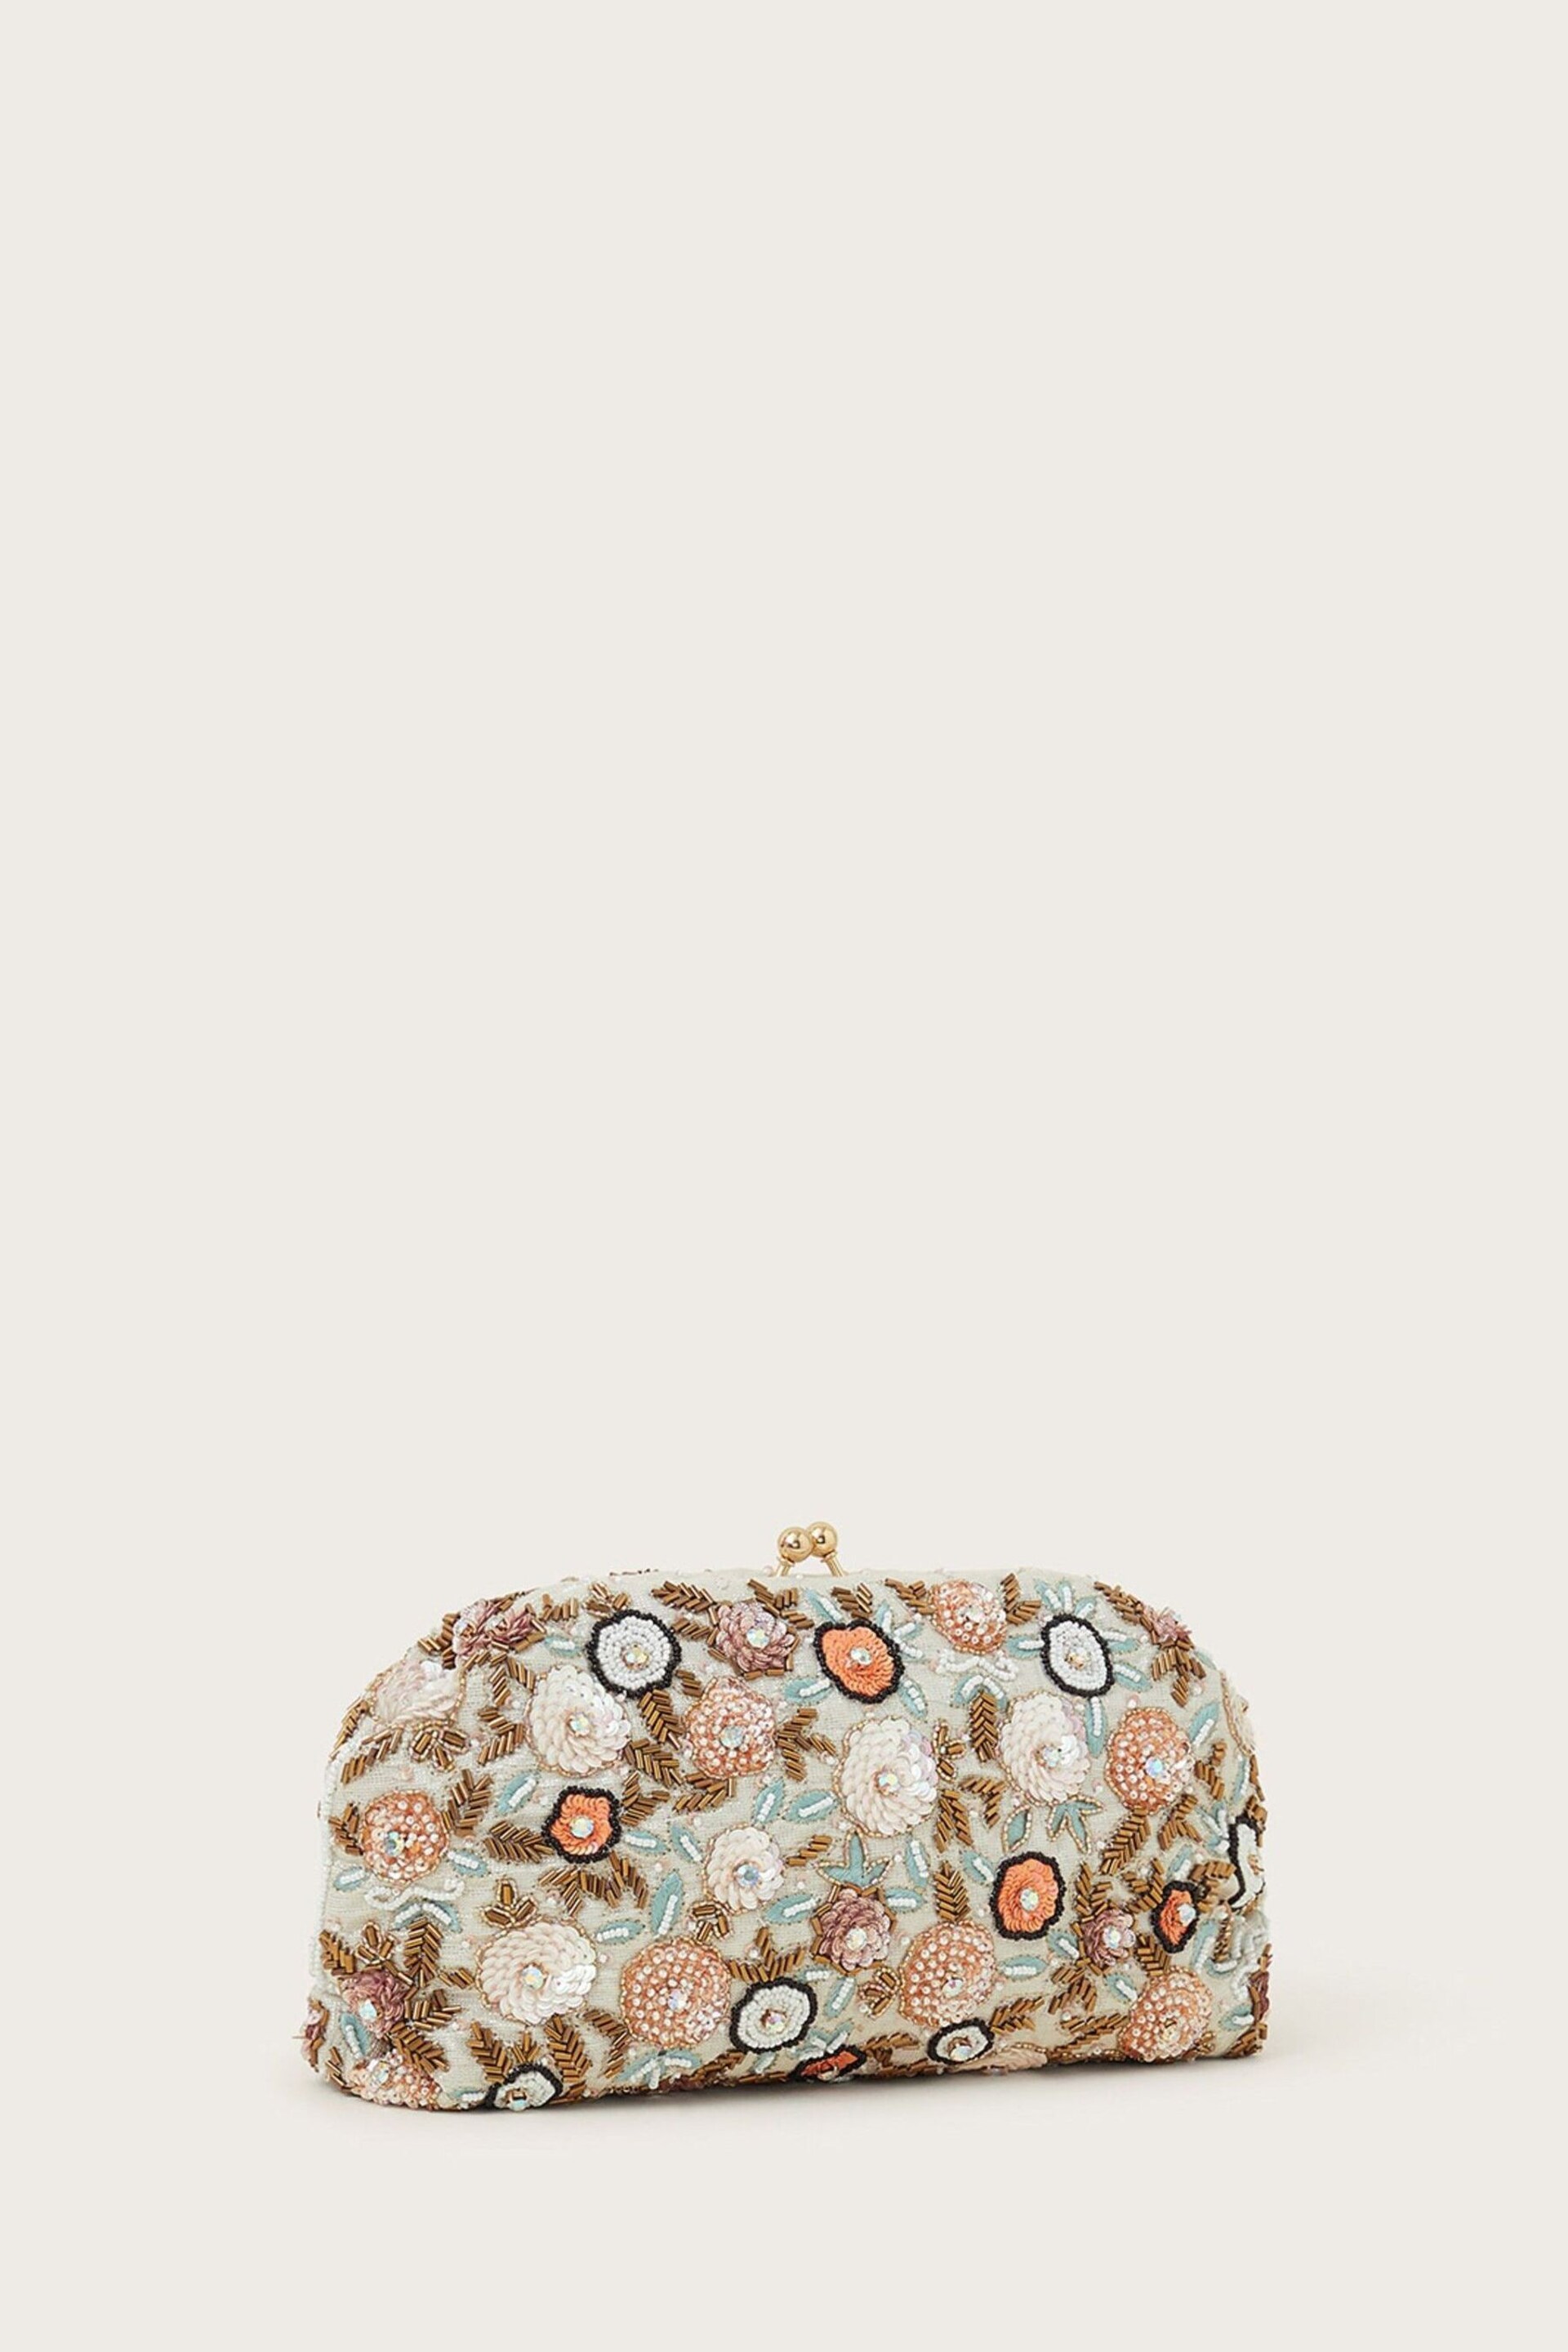 Monsoon Multi Pastel Floral Clutch - Image 2 of 3